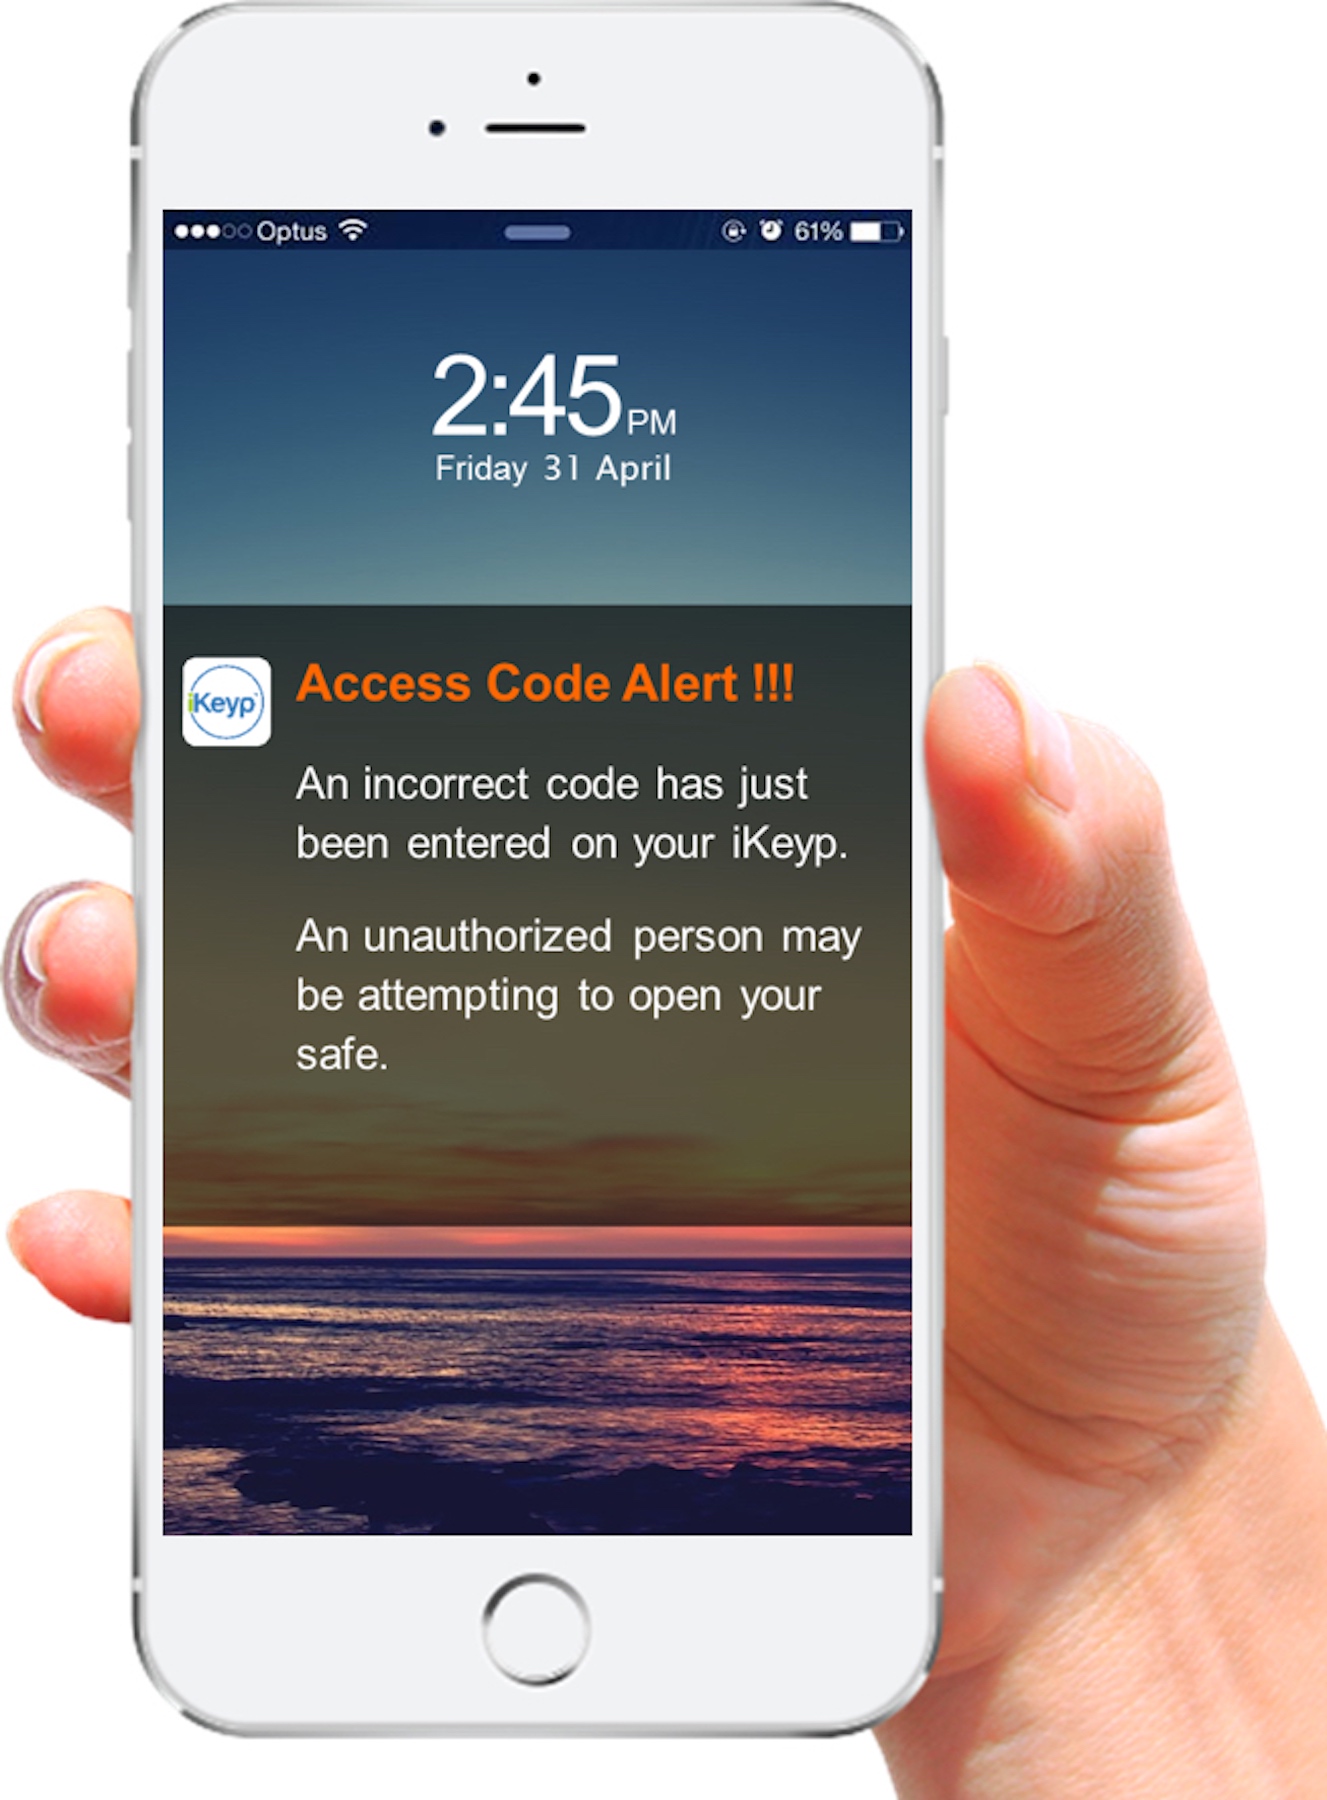 Unlike other safes on the market, the iKeyp connects easily to the Internet and provides real-time security alerts and medication adherence reminders via text, email or mobile app alerts.